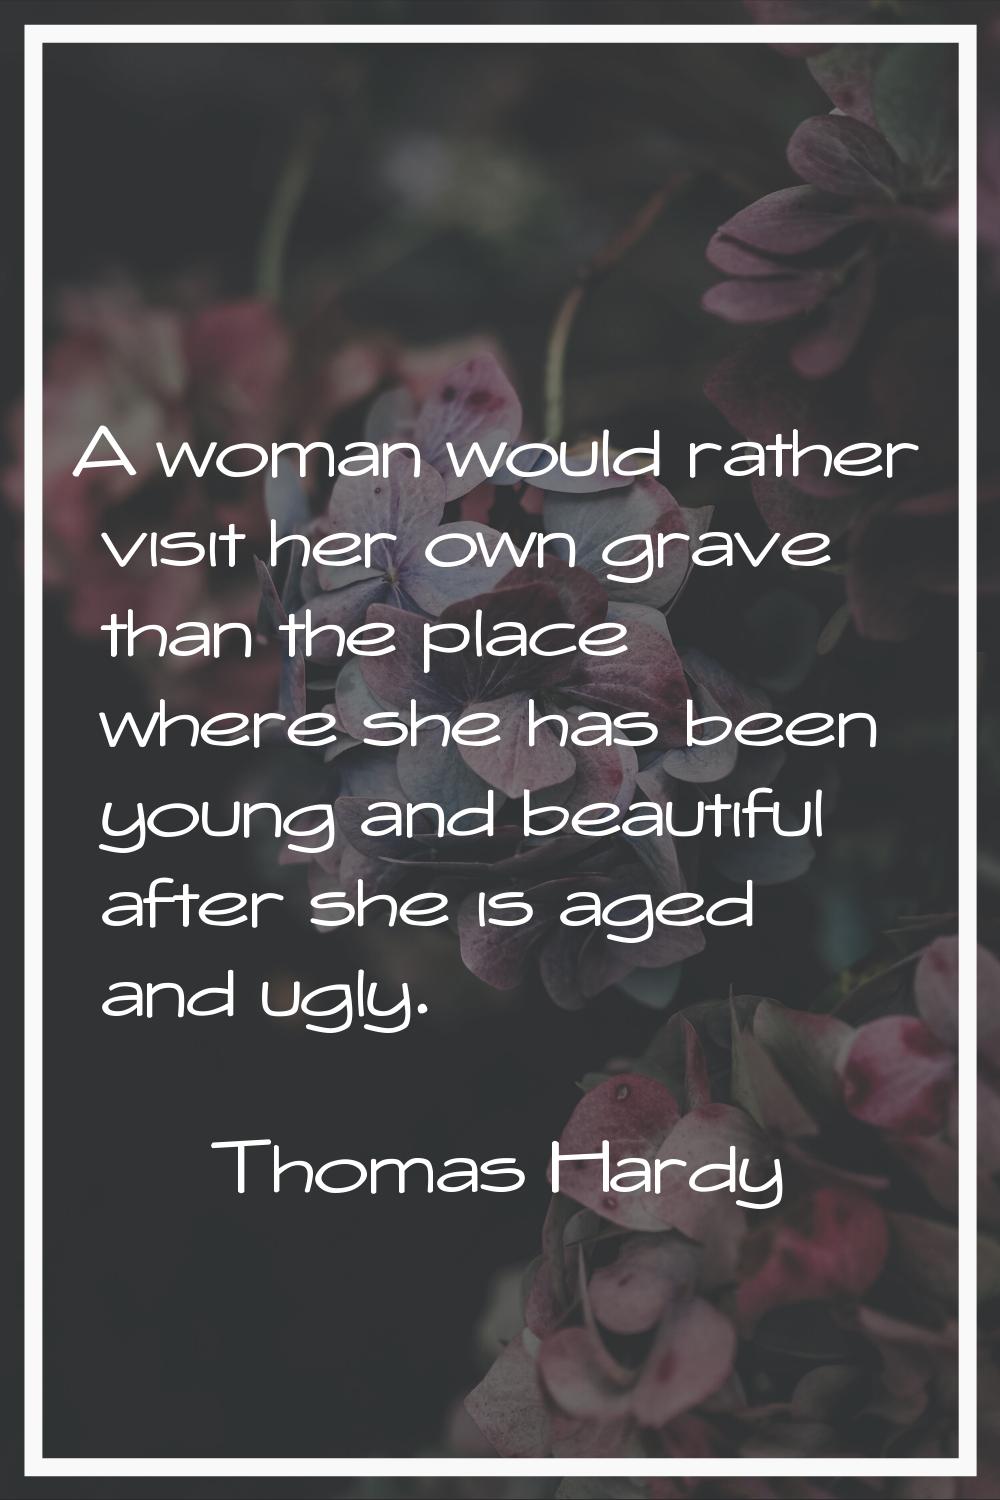 A woman would rather visit her own grave than the place where she has been young and beautiful afte